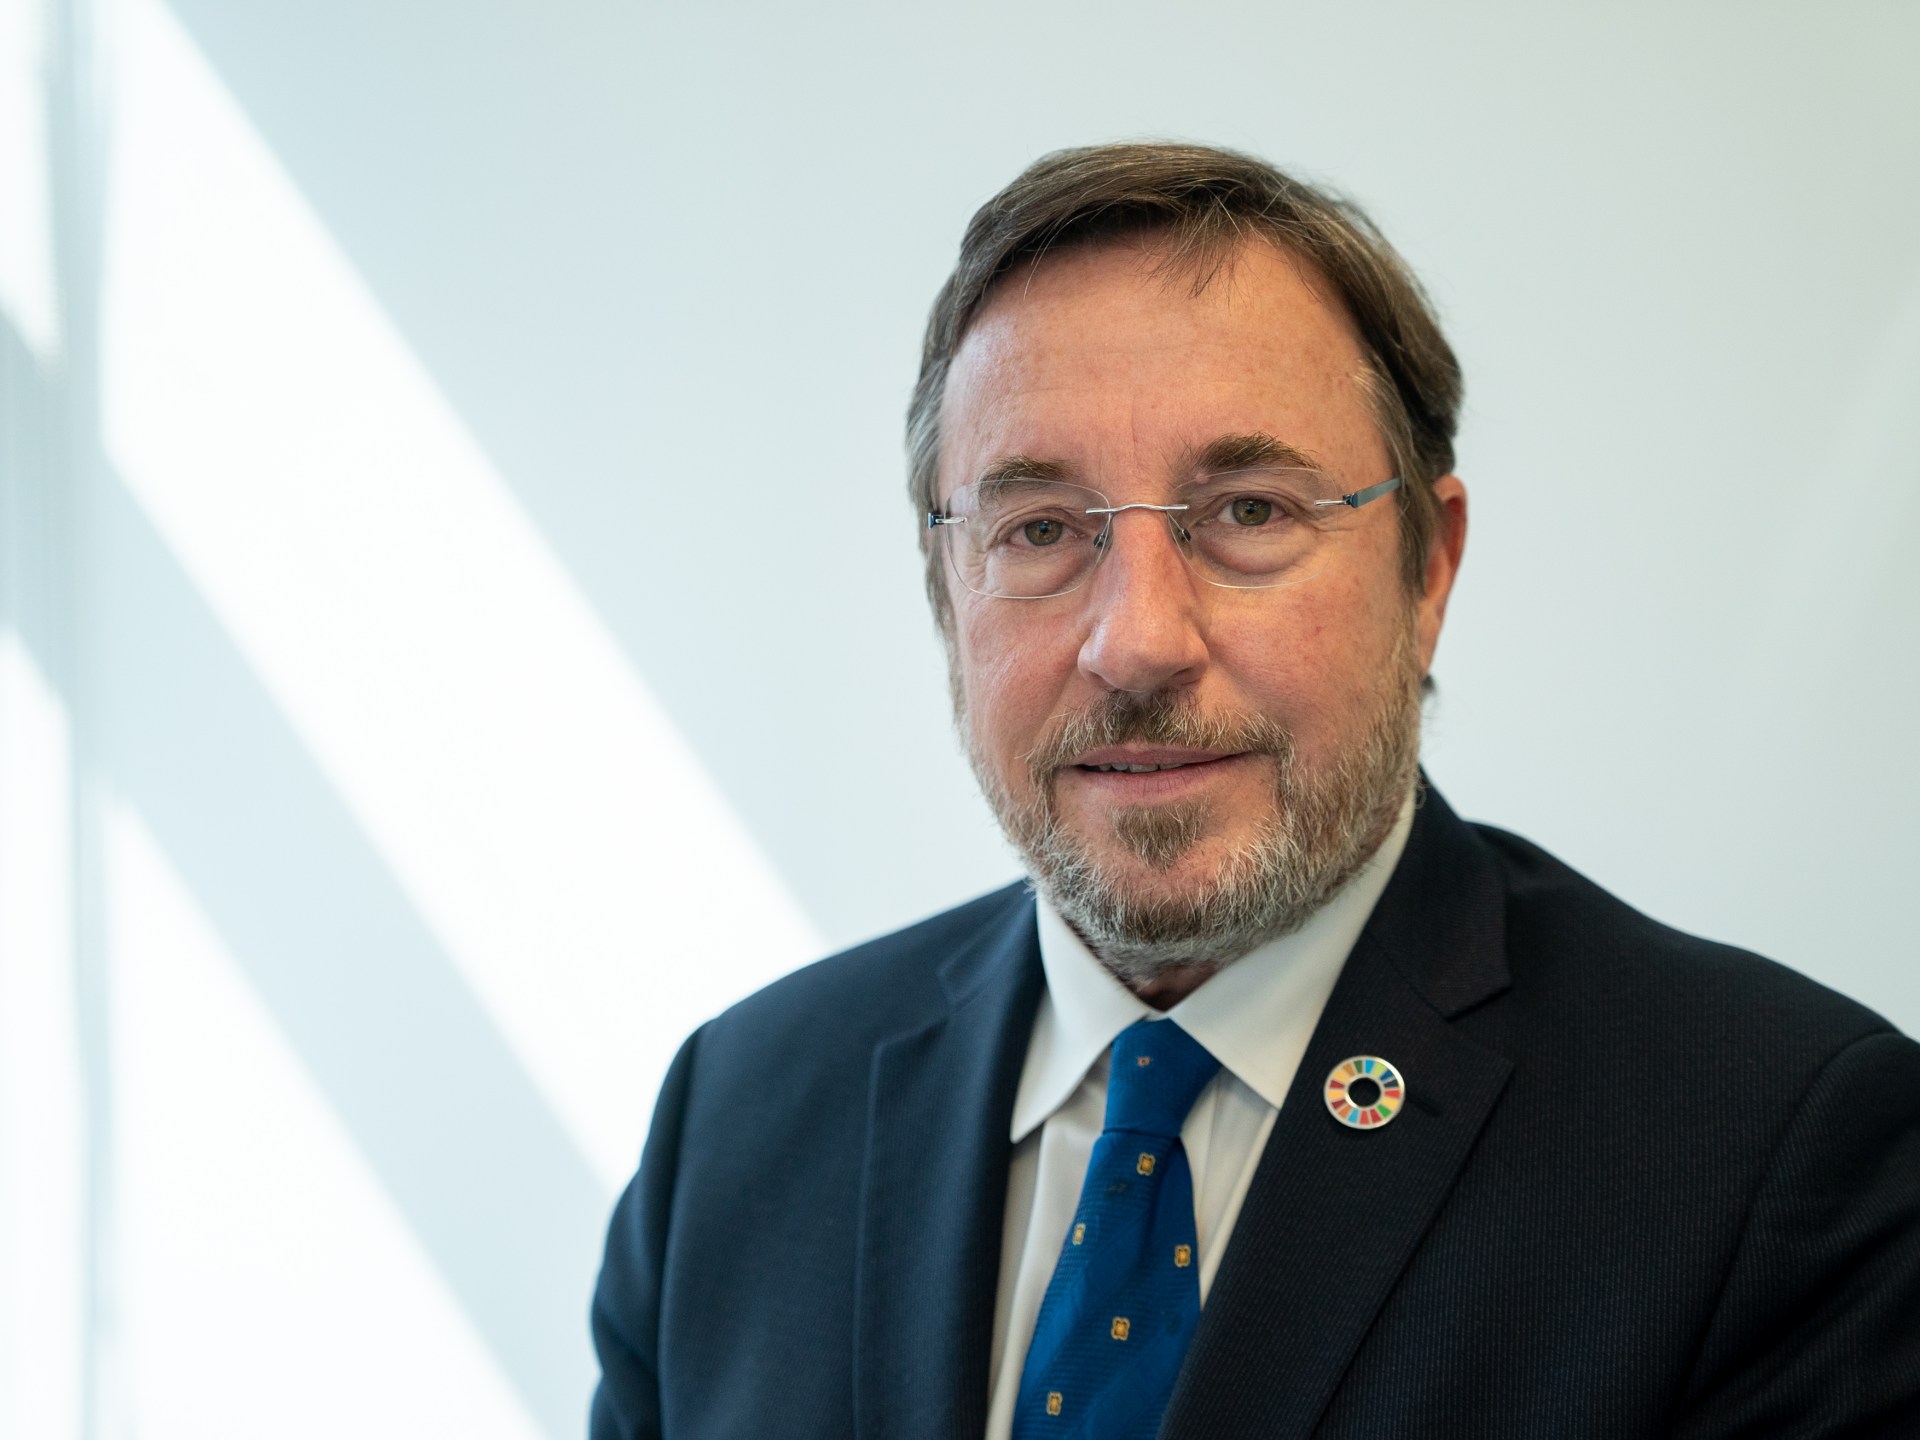 UNDP’s Steiner on the climate stats that keep him up at night | Economy ...